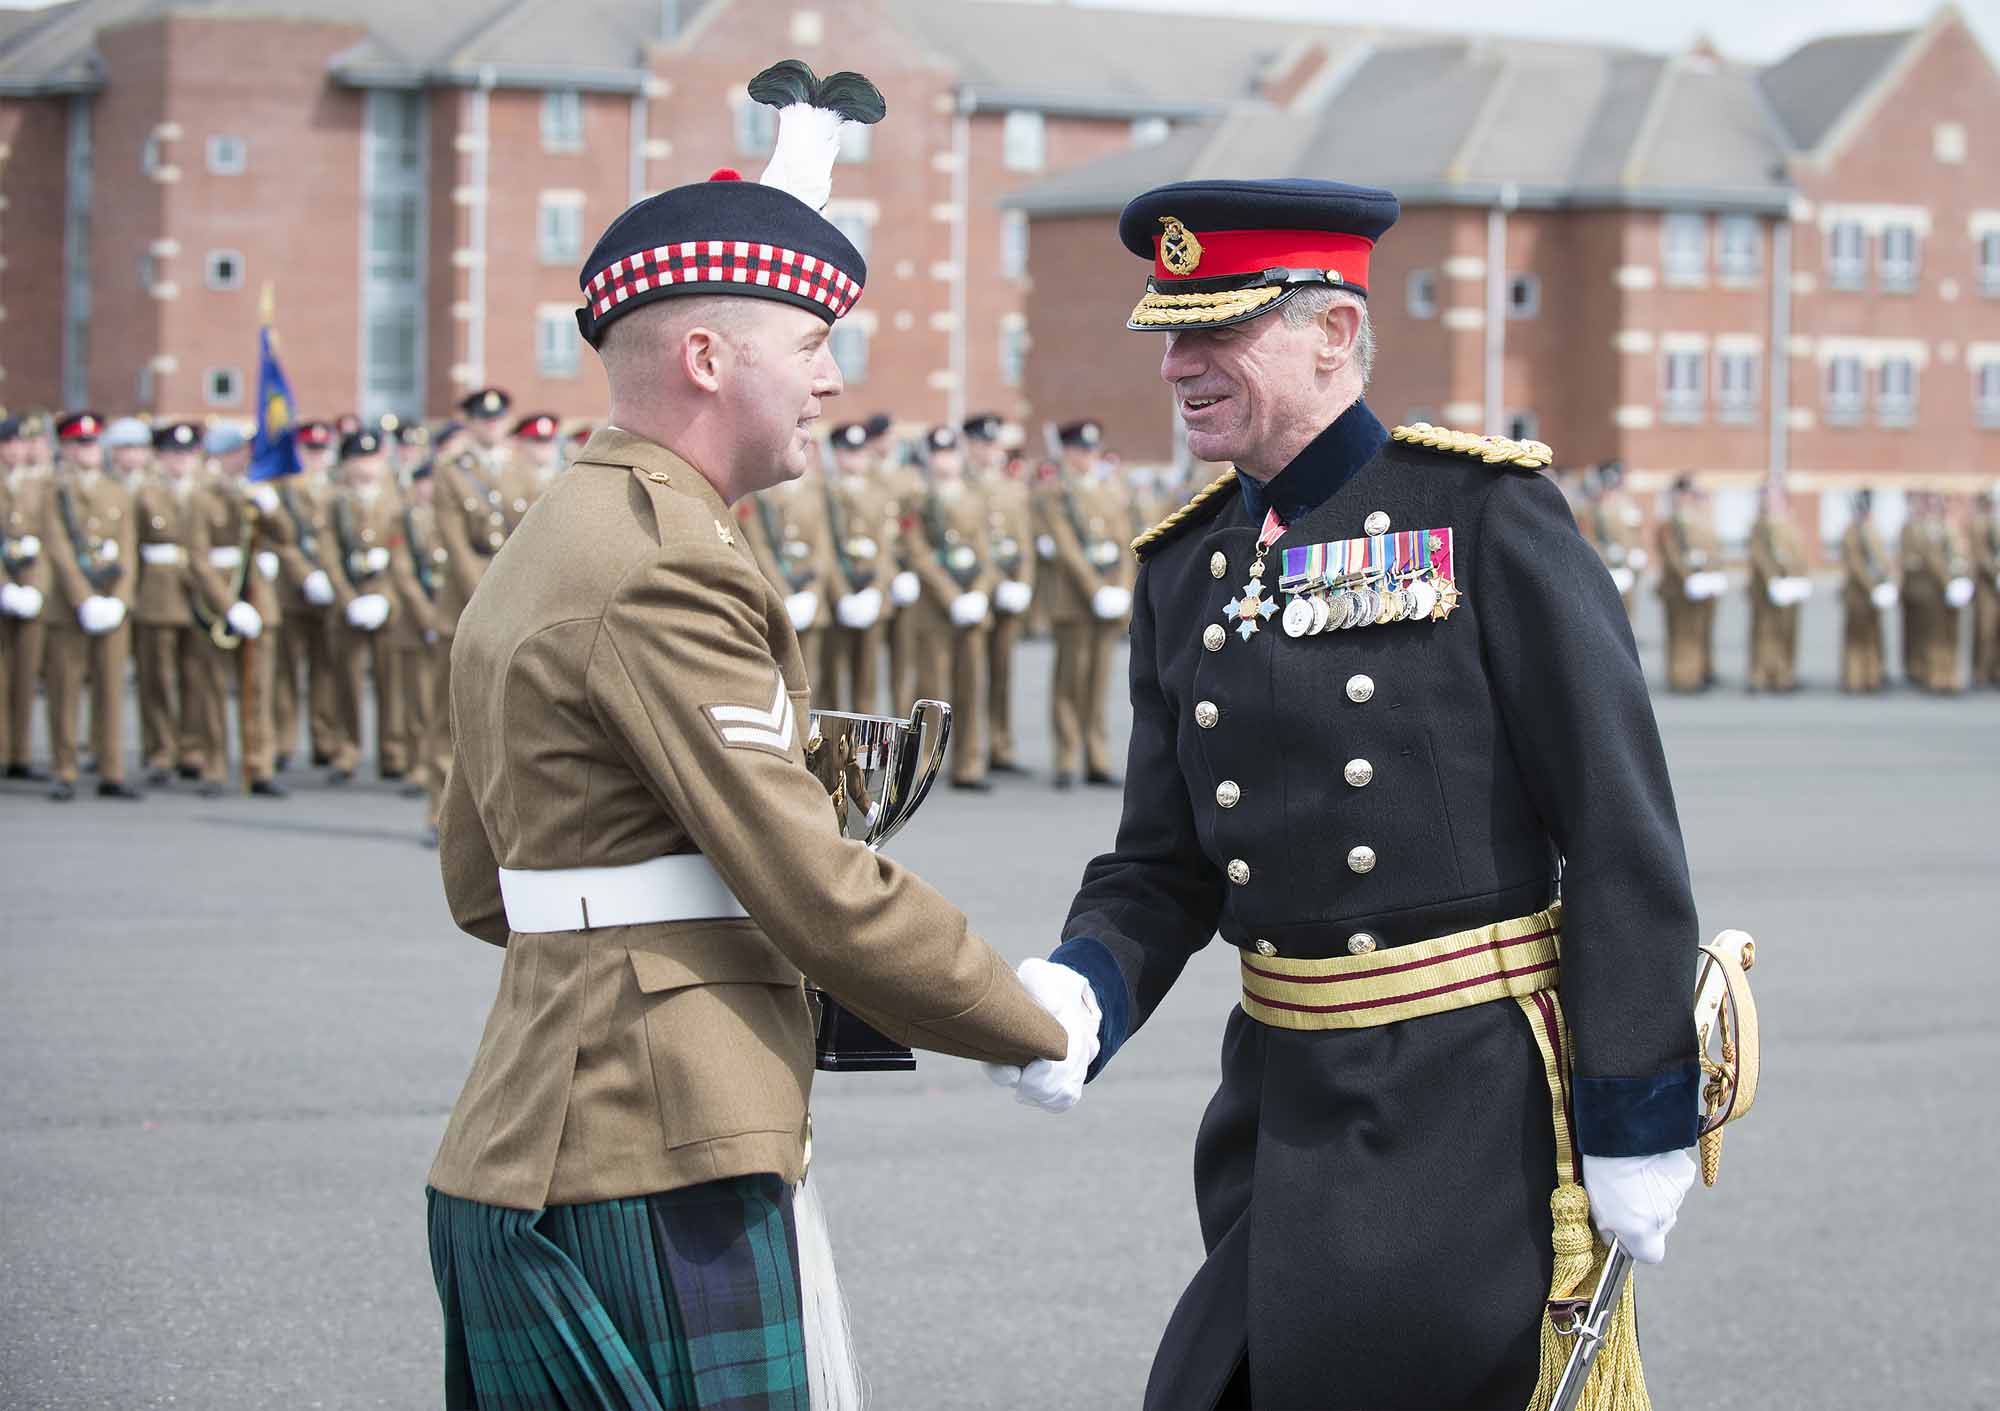 Pictured:Corporal McMurtry from The Royal Regiment of Scotland receiving the Inspirational Leader Award from Lieutenant General Beckett CBE, Defence Senior Advisor Middle East.   More than 600 teenagers from the Army Foundation College marched on their way to a new career when they graduated from the military training establishment in Harrogate, North Yorkshire. The college in Penny Pot Lane, Harrogate runs two types of course – a 40-week long course and a shorter 20-week course to train 16-17 year olds for a wide variety of Army careers. NOTE TO DESKS:  MoD release authorised handout images.  All images remain Crown Copyright 2016.  Photo credit to read -Sgt Jamie Peters RLC (Phot) Email: jamiepeters@mediaops.army.mod.uk richardwatt@mediaops.army.mod.uk shanewilkinson@mediaops.army.mod.uk Richard Watt - 07836 515306 Shane Wilkinson - 07901 590723